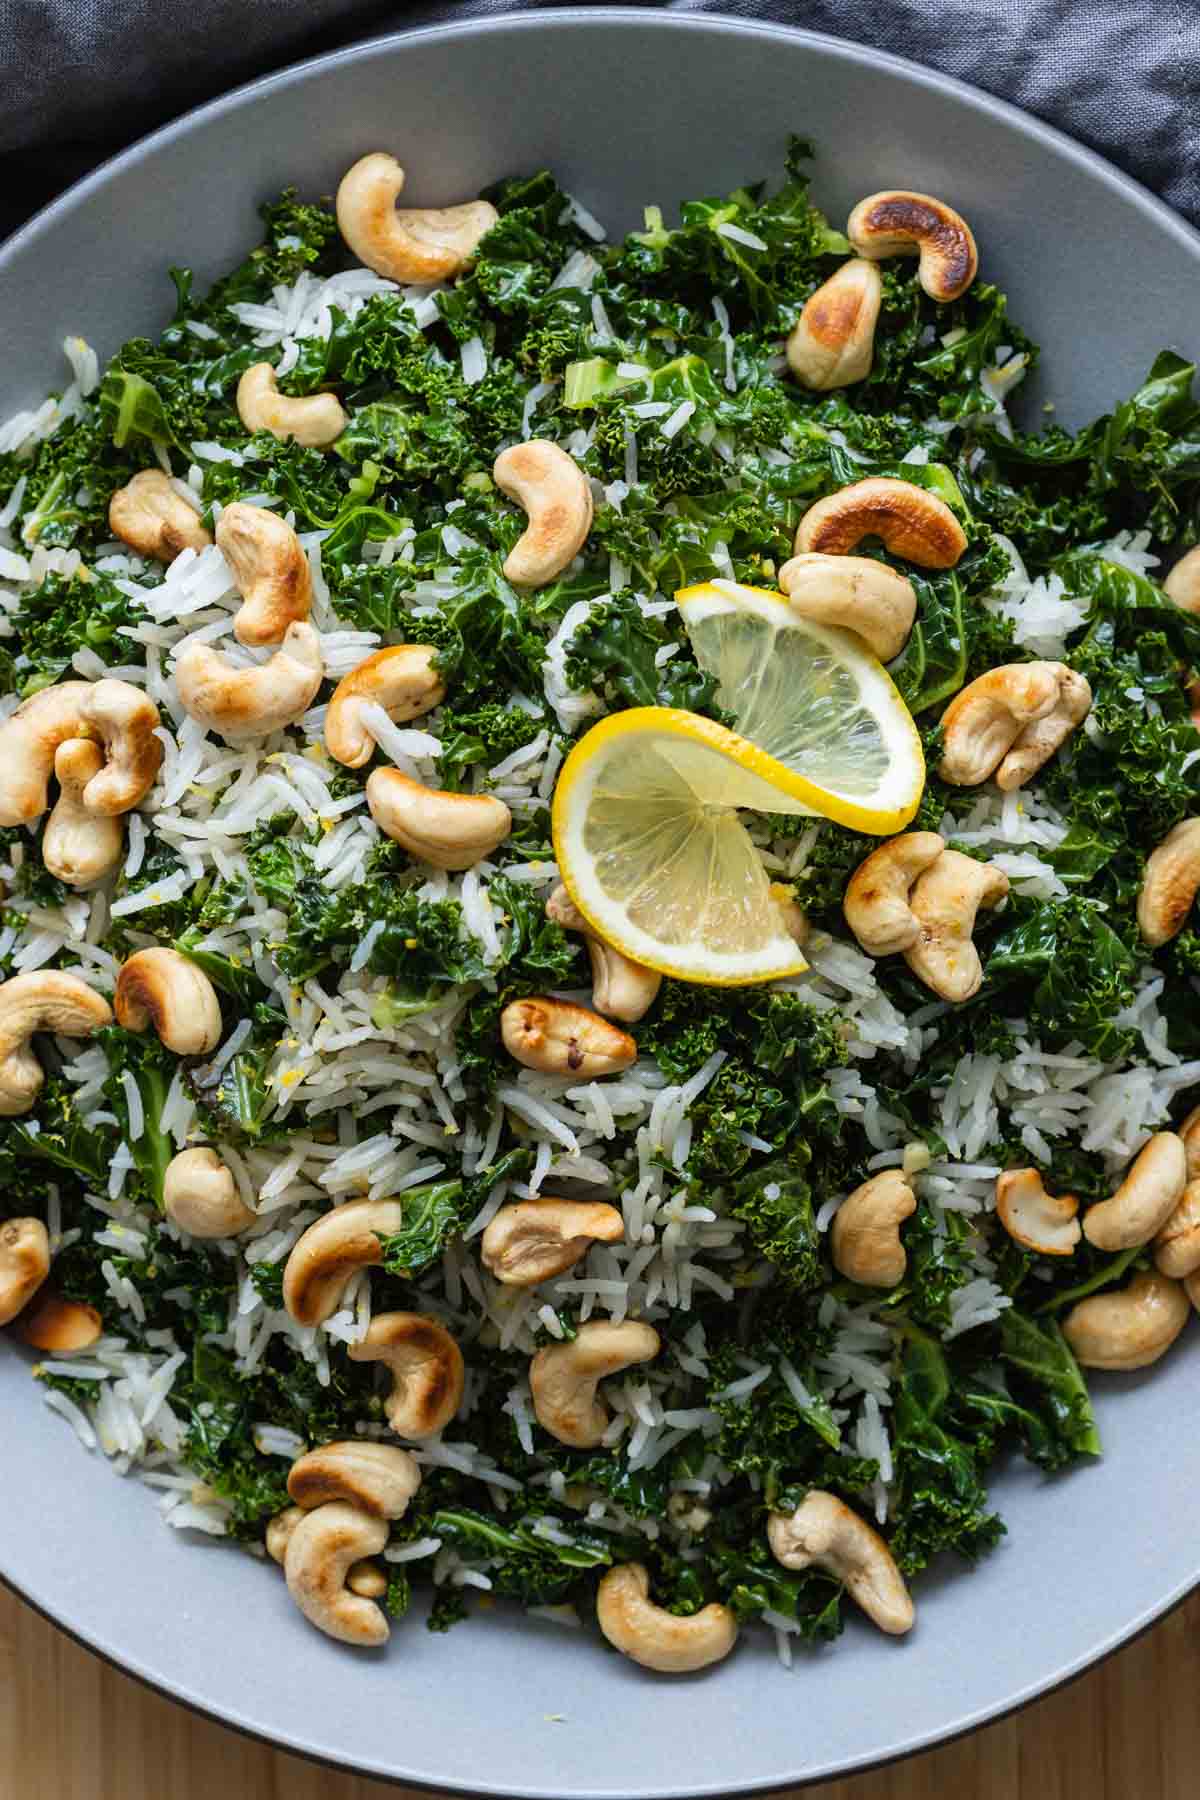 White rice, kale, and cashews in a bowl topped with a slice of lemon.